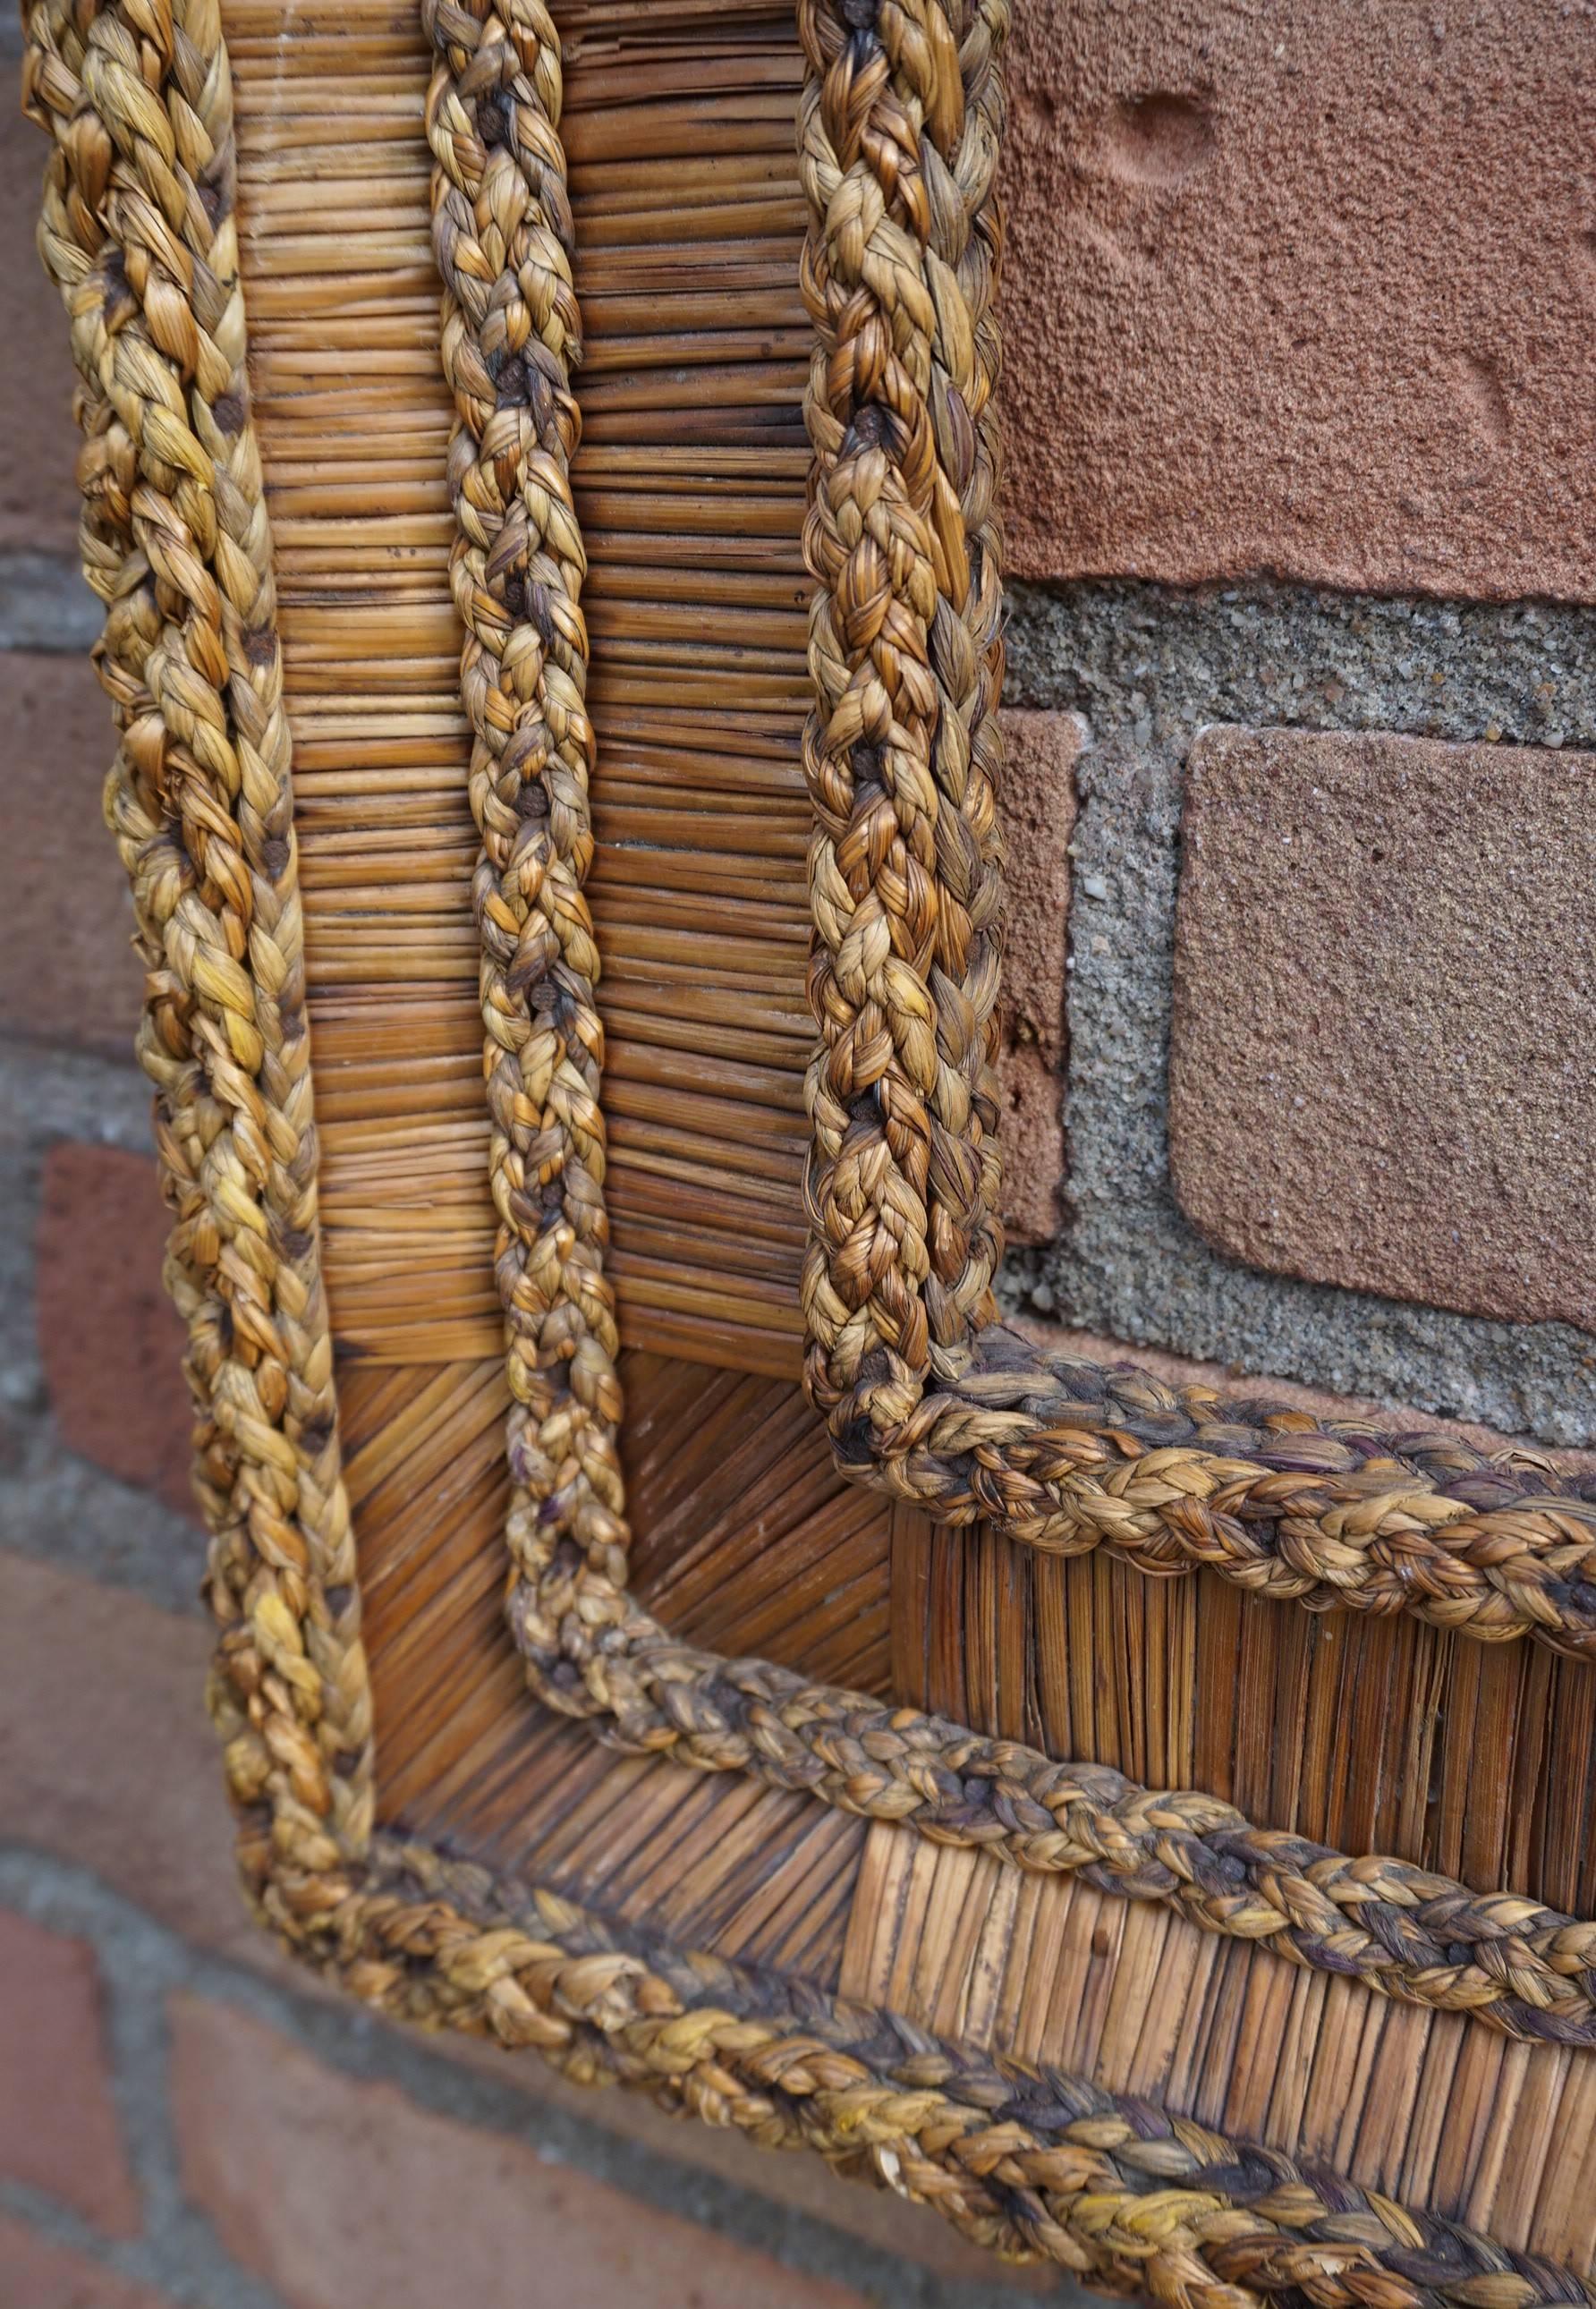 20th Century Vintage Hand-Woven Straw on Wood, Stylishly Organic Picture or Mirror Frame 